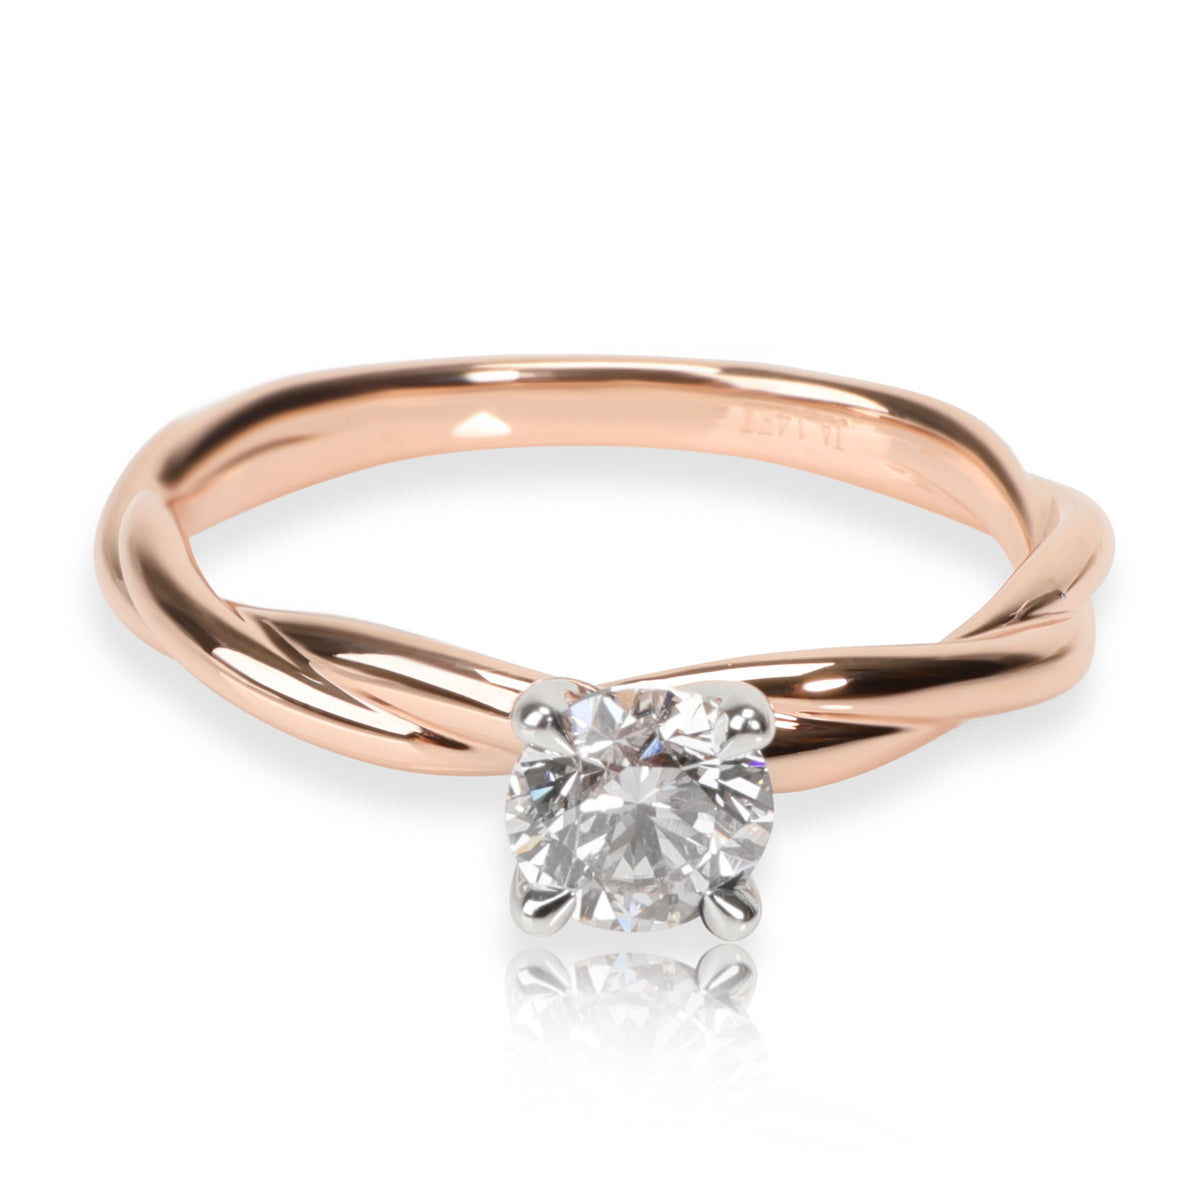 James Allen | Rings, Diamonds & Fine Jewelry | ReviewCollections